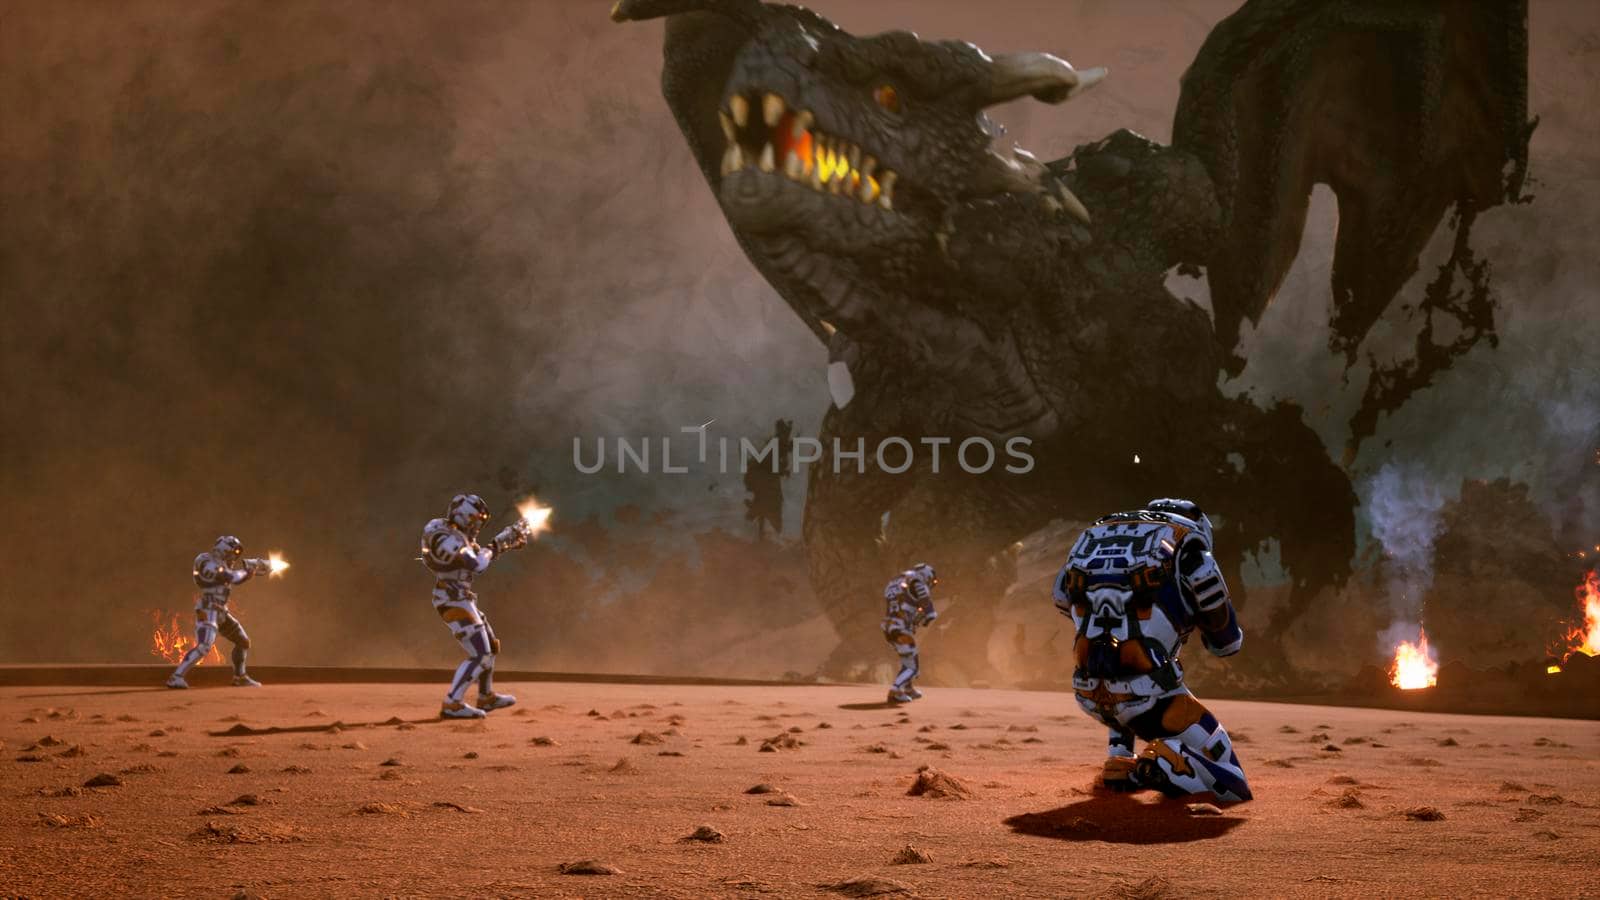 Astronauts against the dragon. Epic battle with explosions, shots and smoke on an uncharted planet. 3D Rendering by designprojects